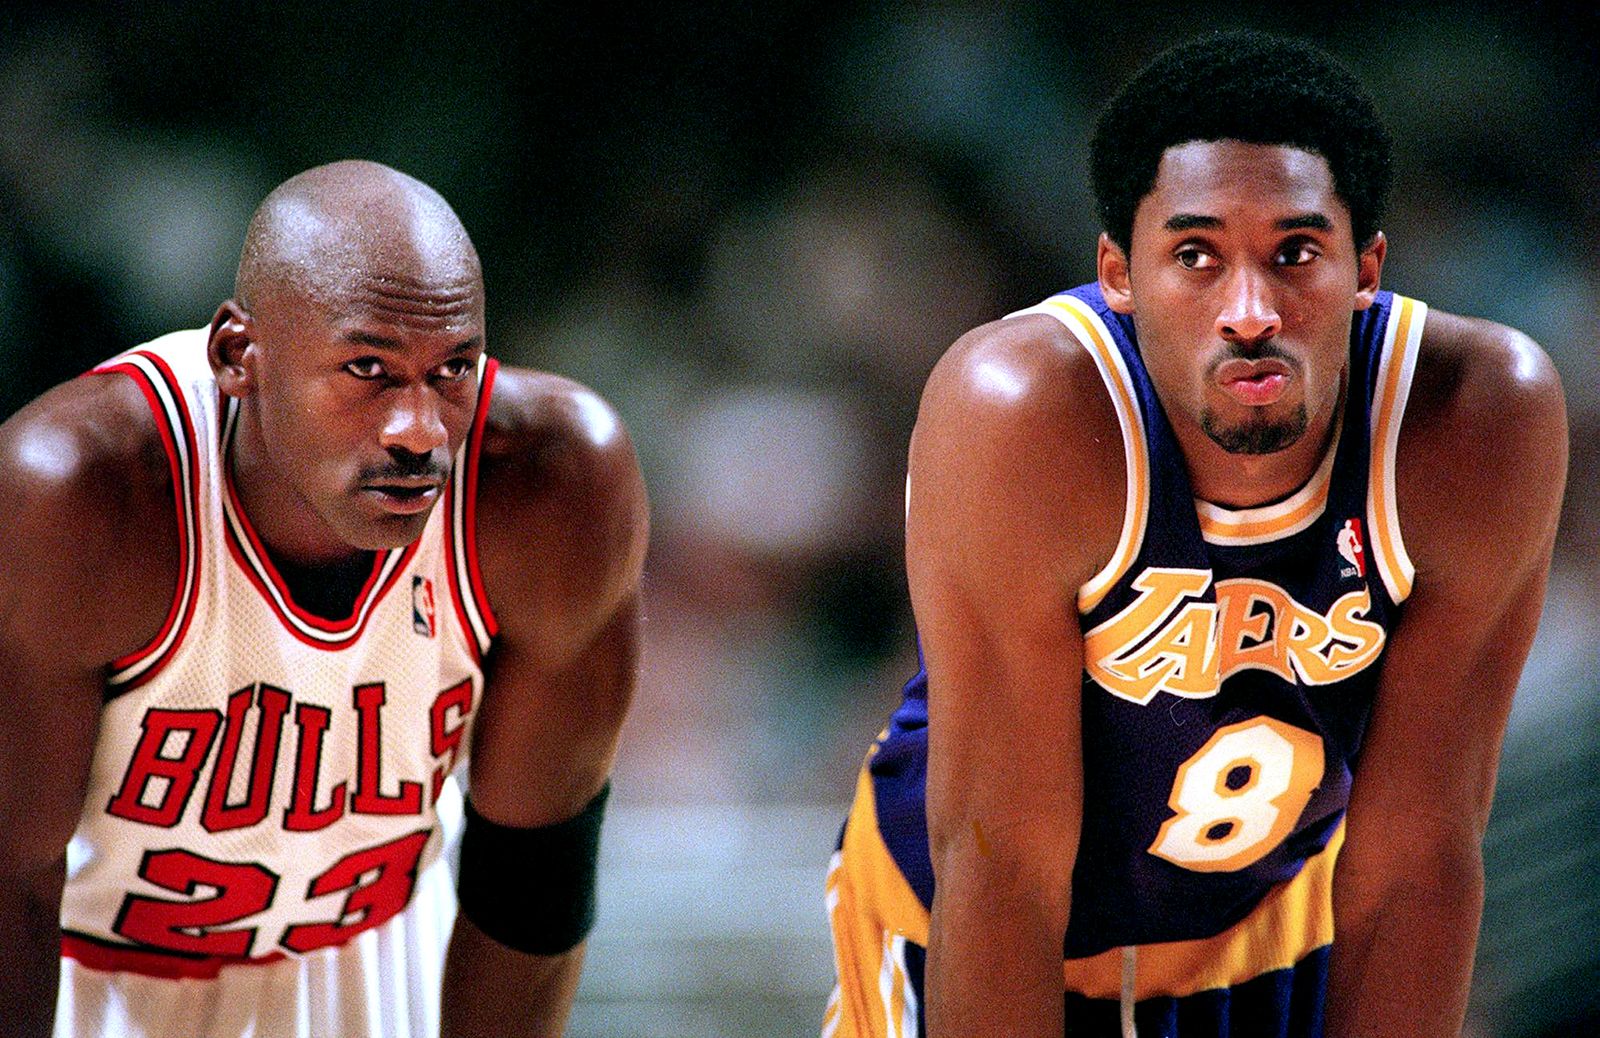 Michael Jordan shares final text messages he exchanged with Kobe Bryant